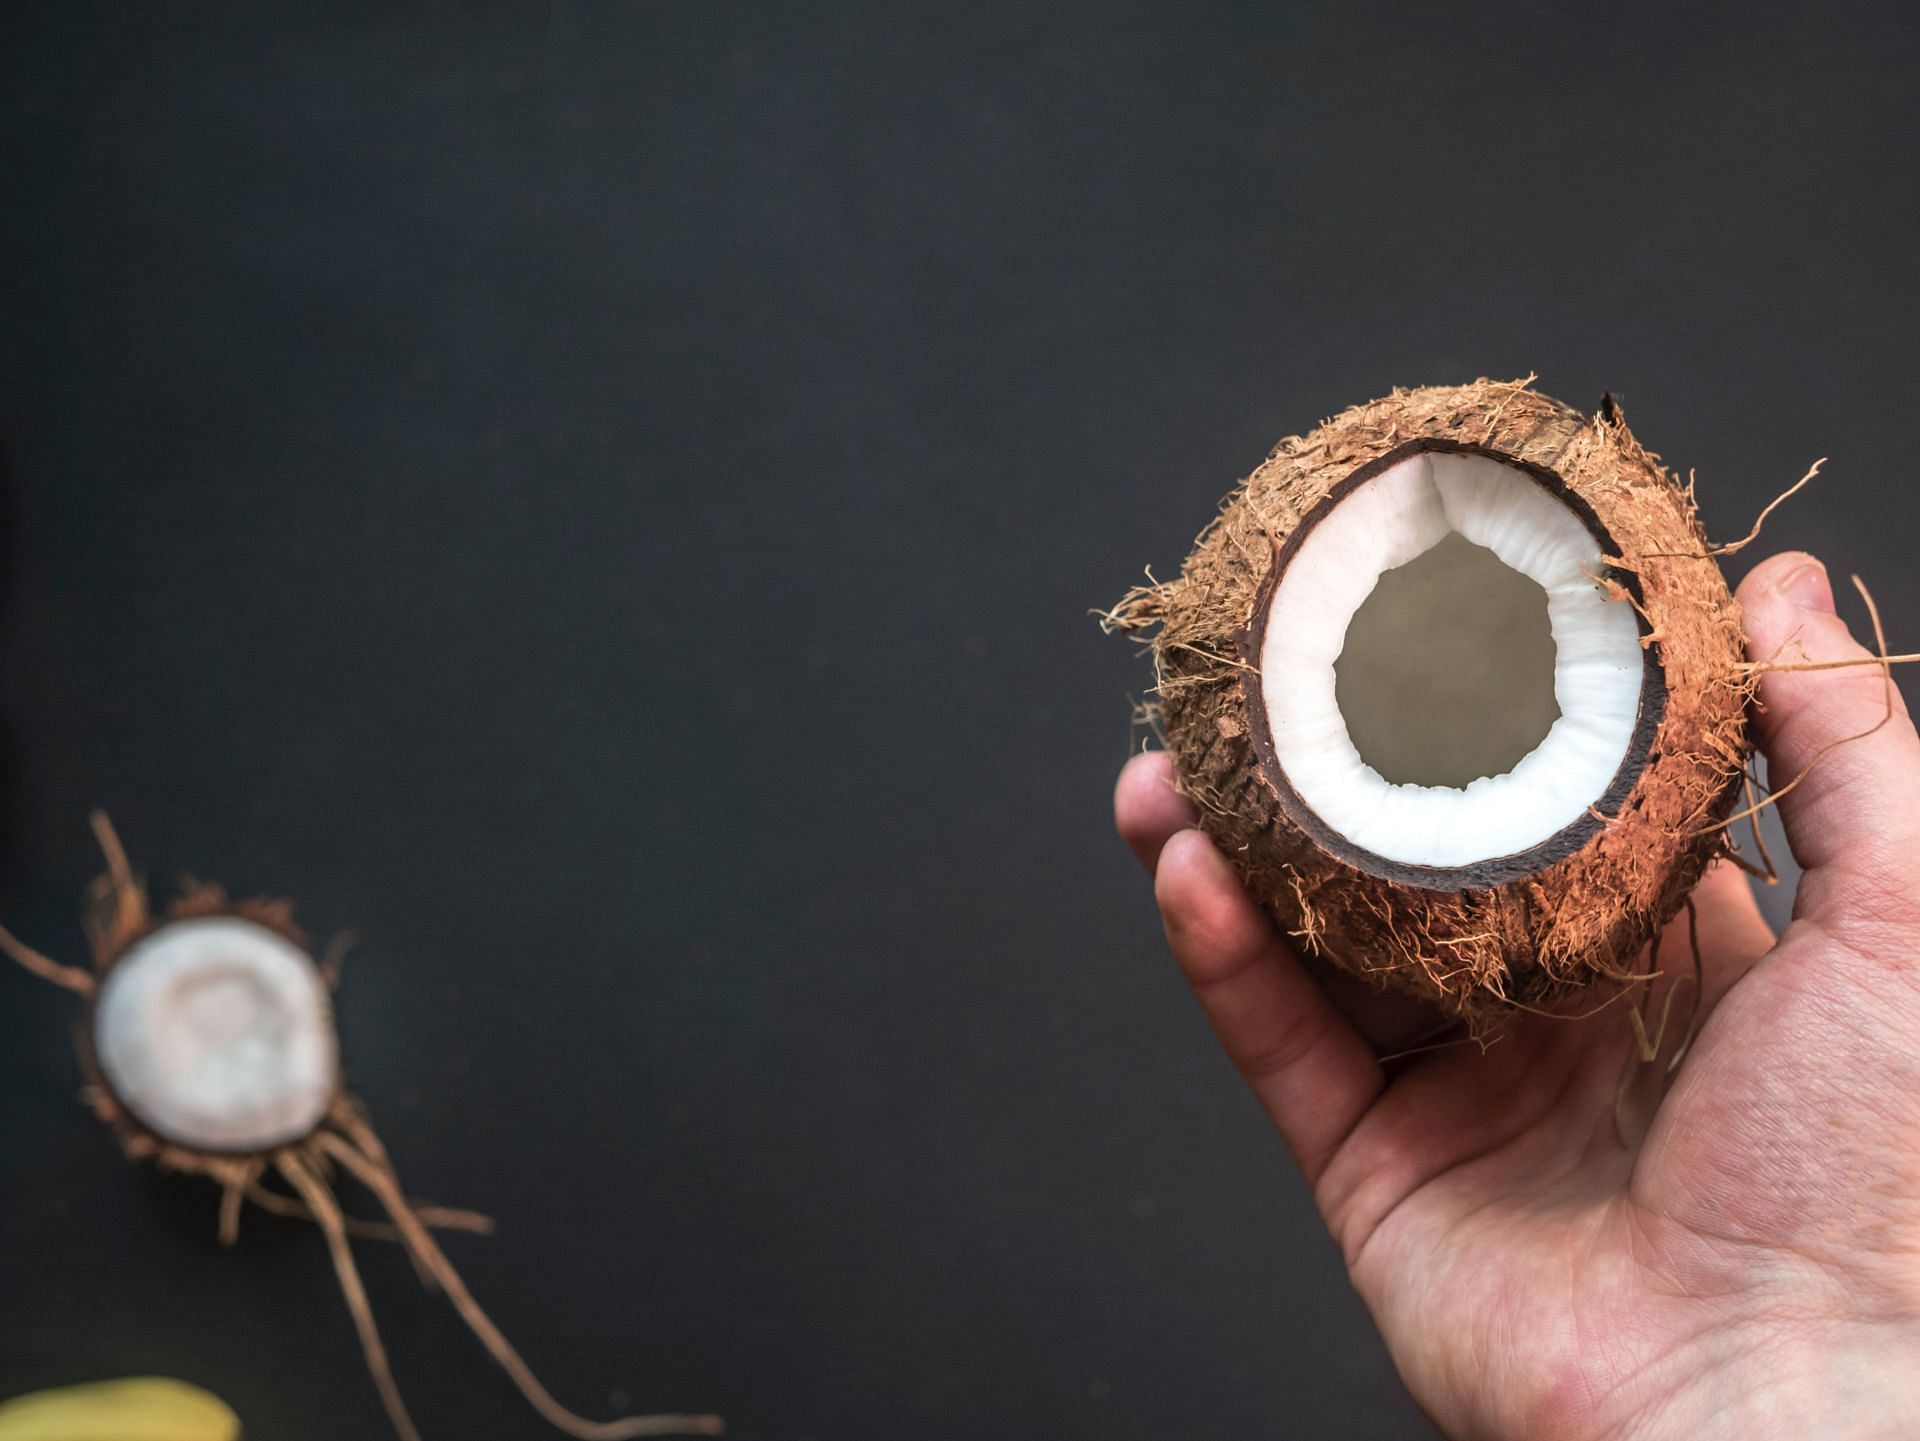 Specifically, the fatty acids present in coconut oil have some anti-microbial properties that can be beneficial for teeth (Image via Pexels @Mike)